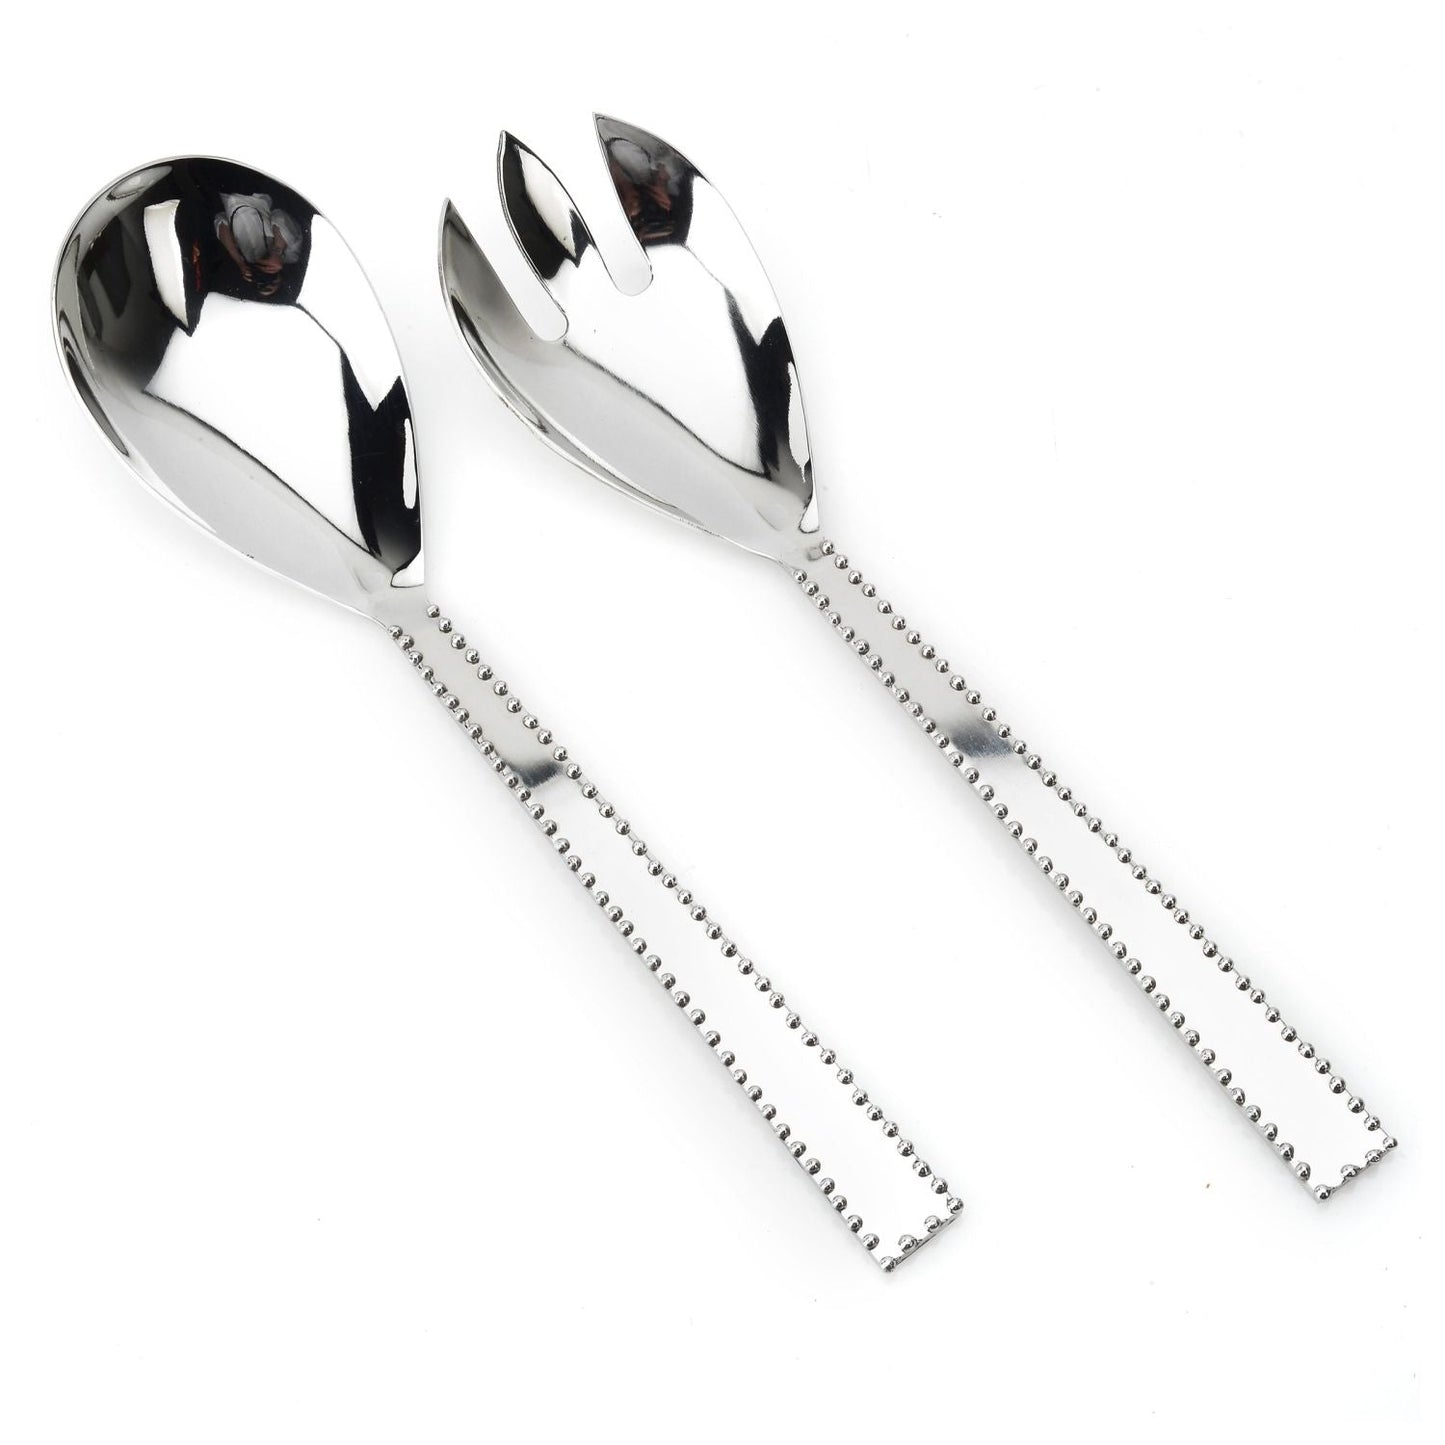 Classic Touch Decor Set Of 2 Salad Servers w/ Beaded Border, Stainless Steel